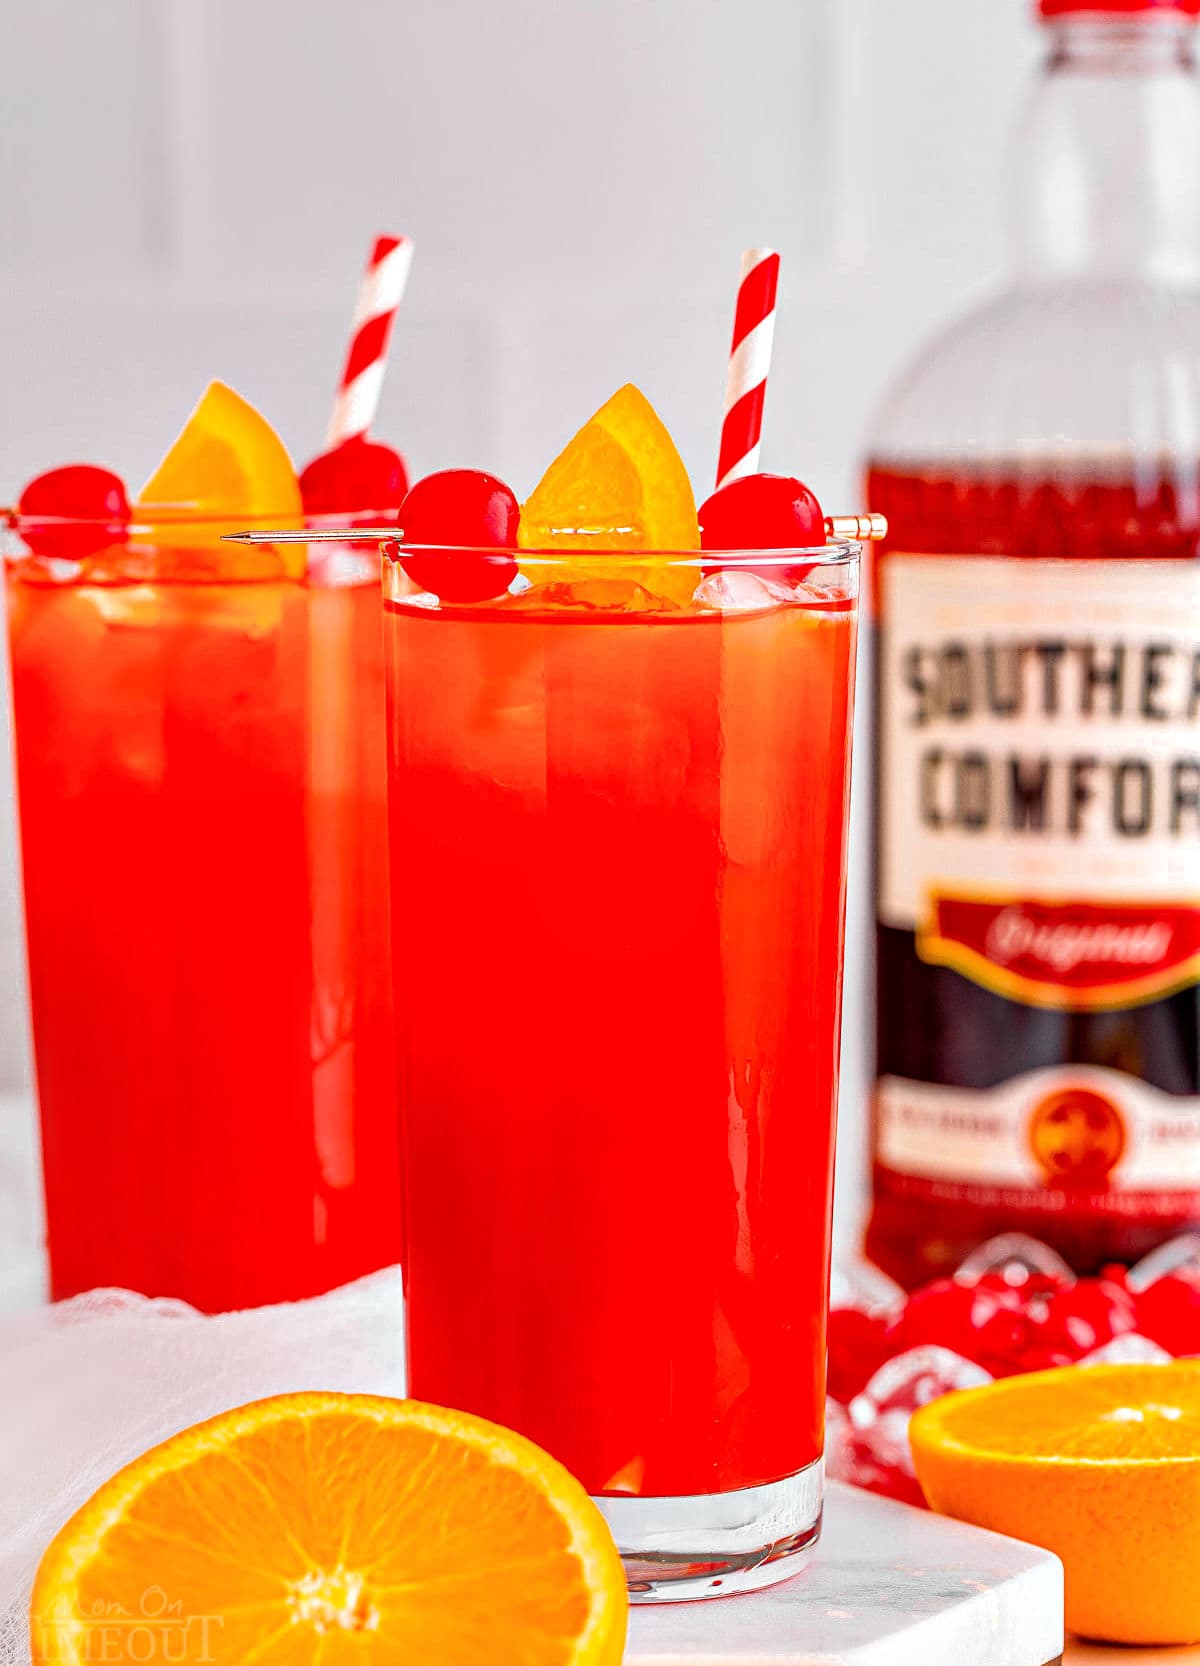 two tall glasses filled with alabama slammer recipe with red and white striped straws. bottle of southern comfort in the background and one orange has been cut in half.